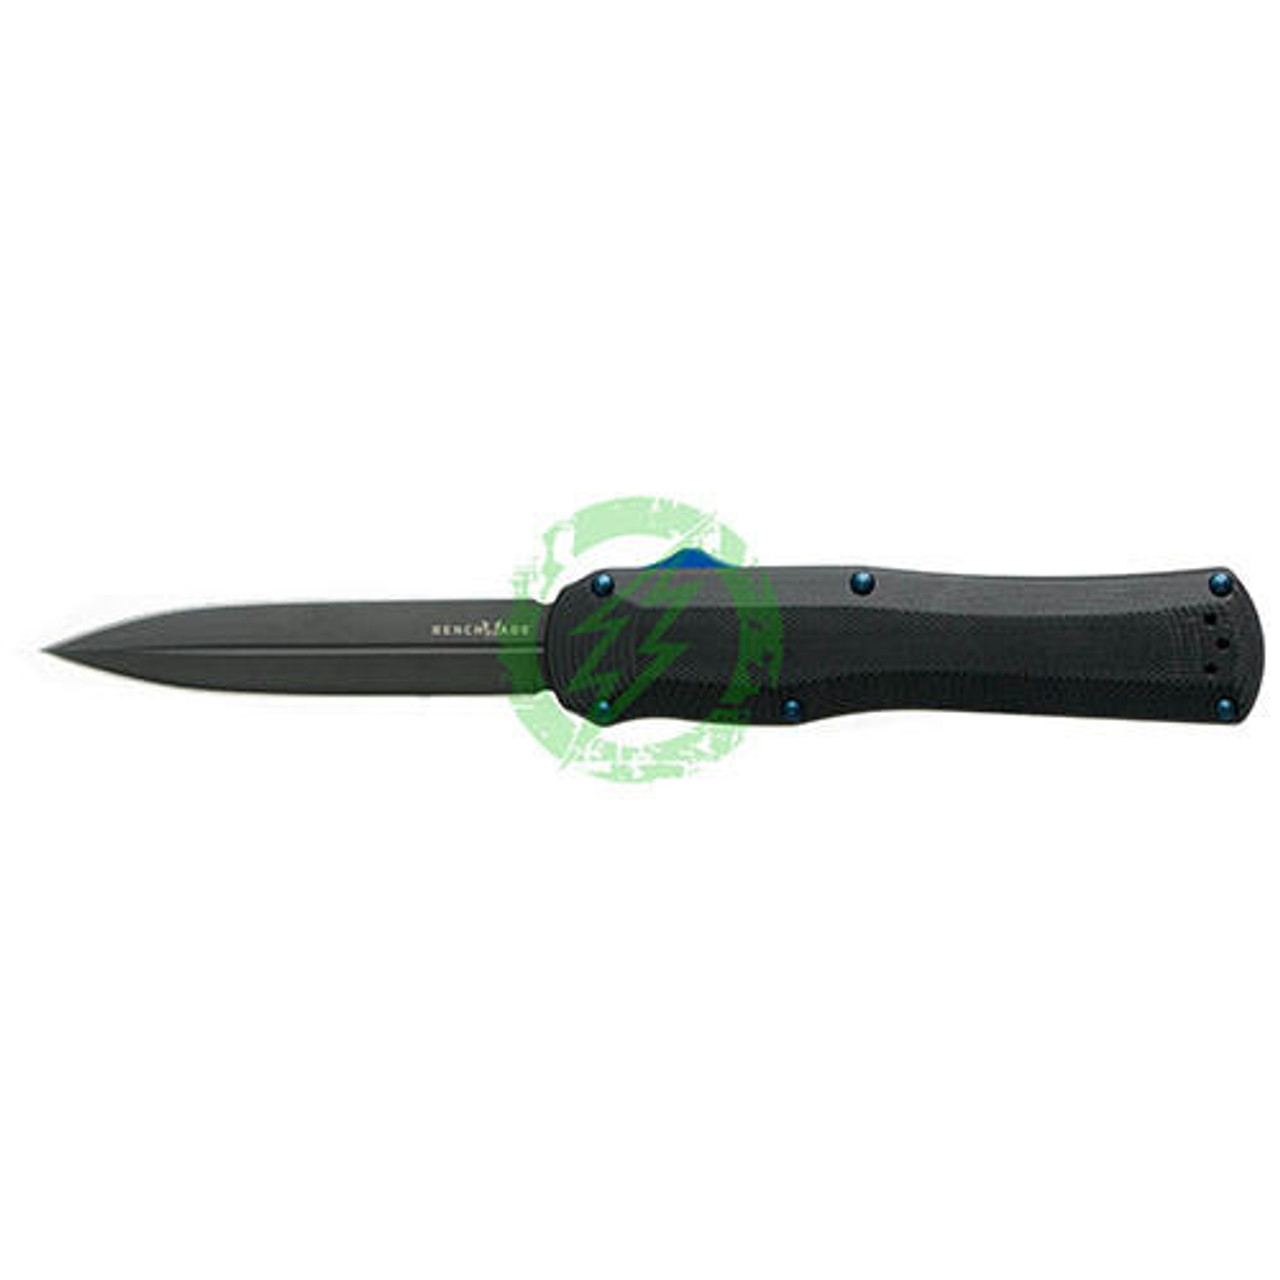  Benchmade Autocrat Double-Edge Dagger with Fuller Peel Ply G10 6061-T6 Aluminum Frame Handle 